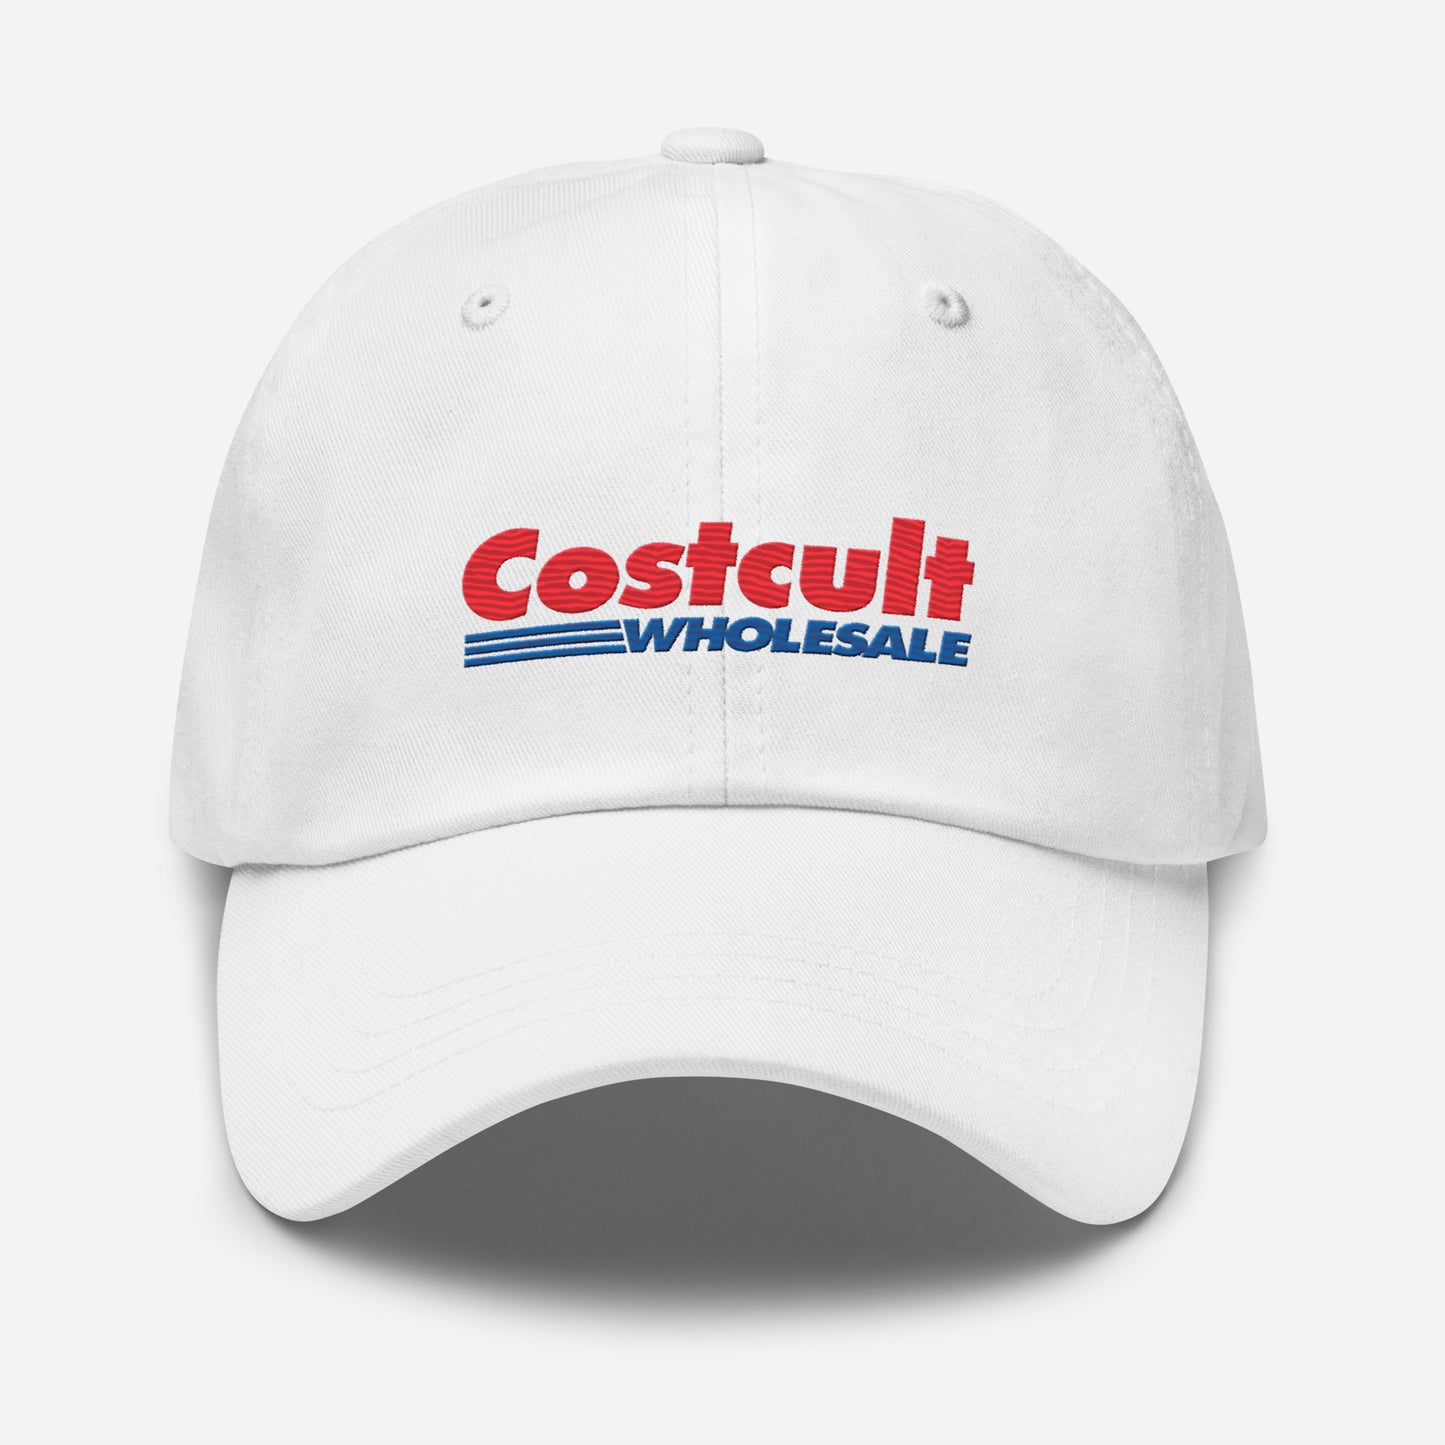 The Costcult Dad Hat